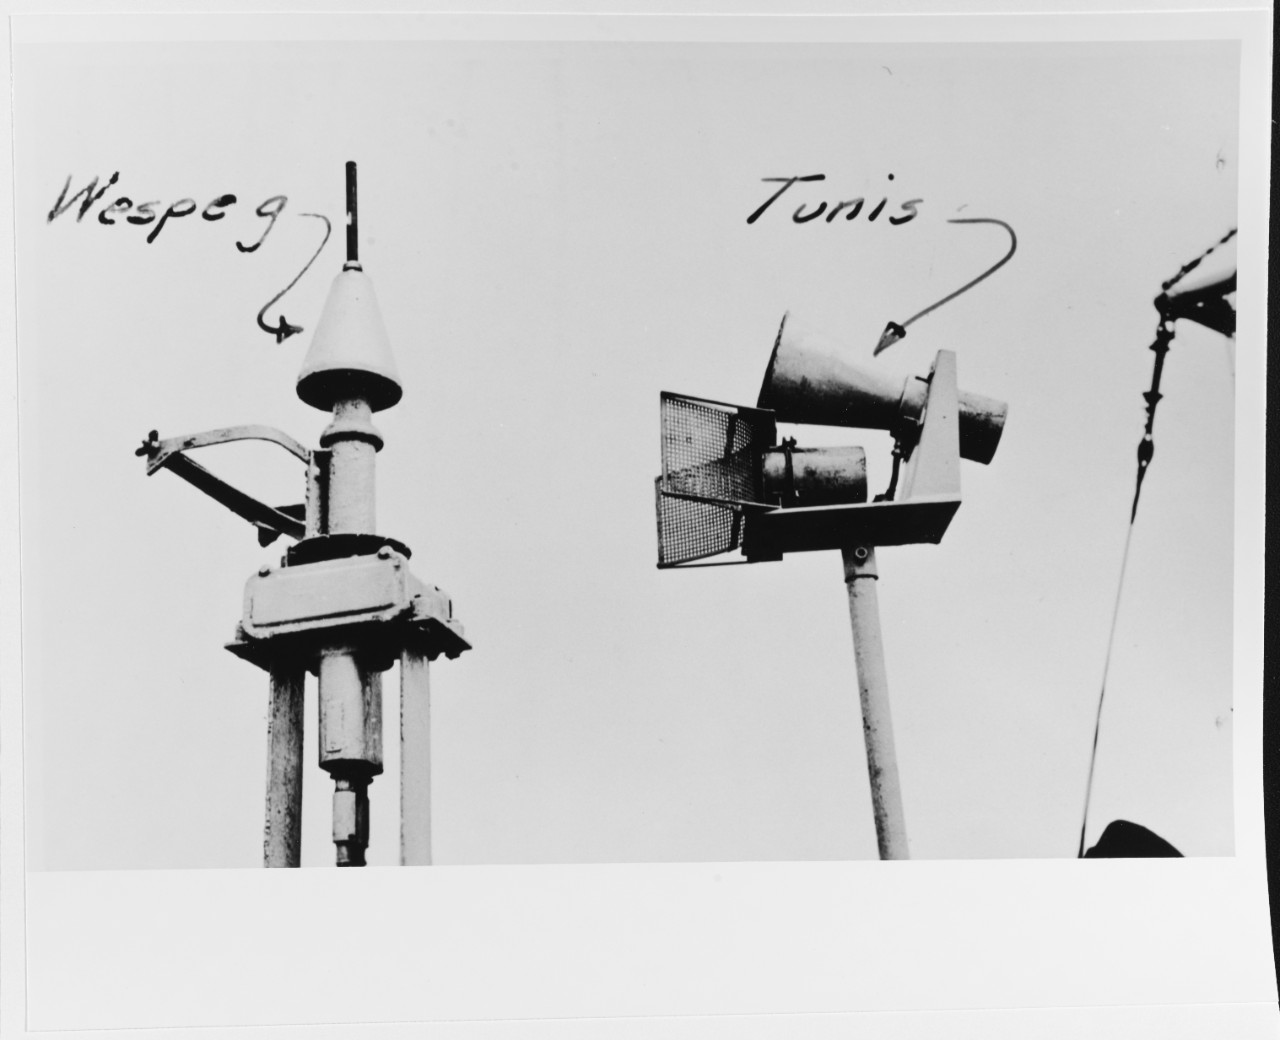 German FuME 42 ("Wespeg") IFF, and FuMB 26 ("Tunis") search receiver antennas